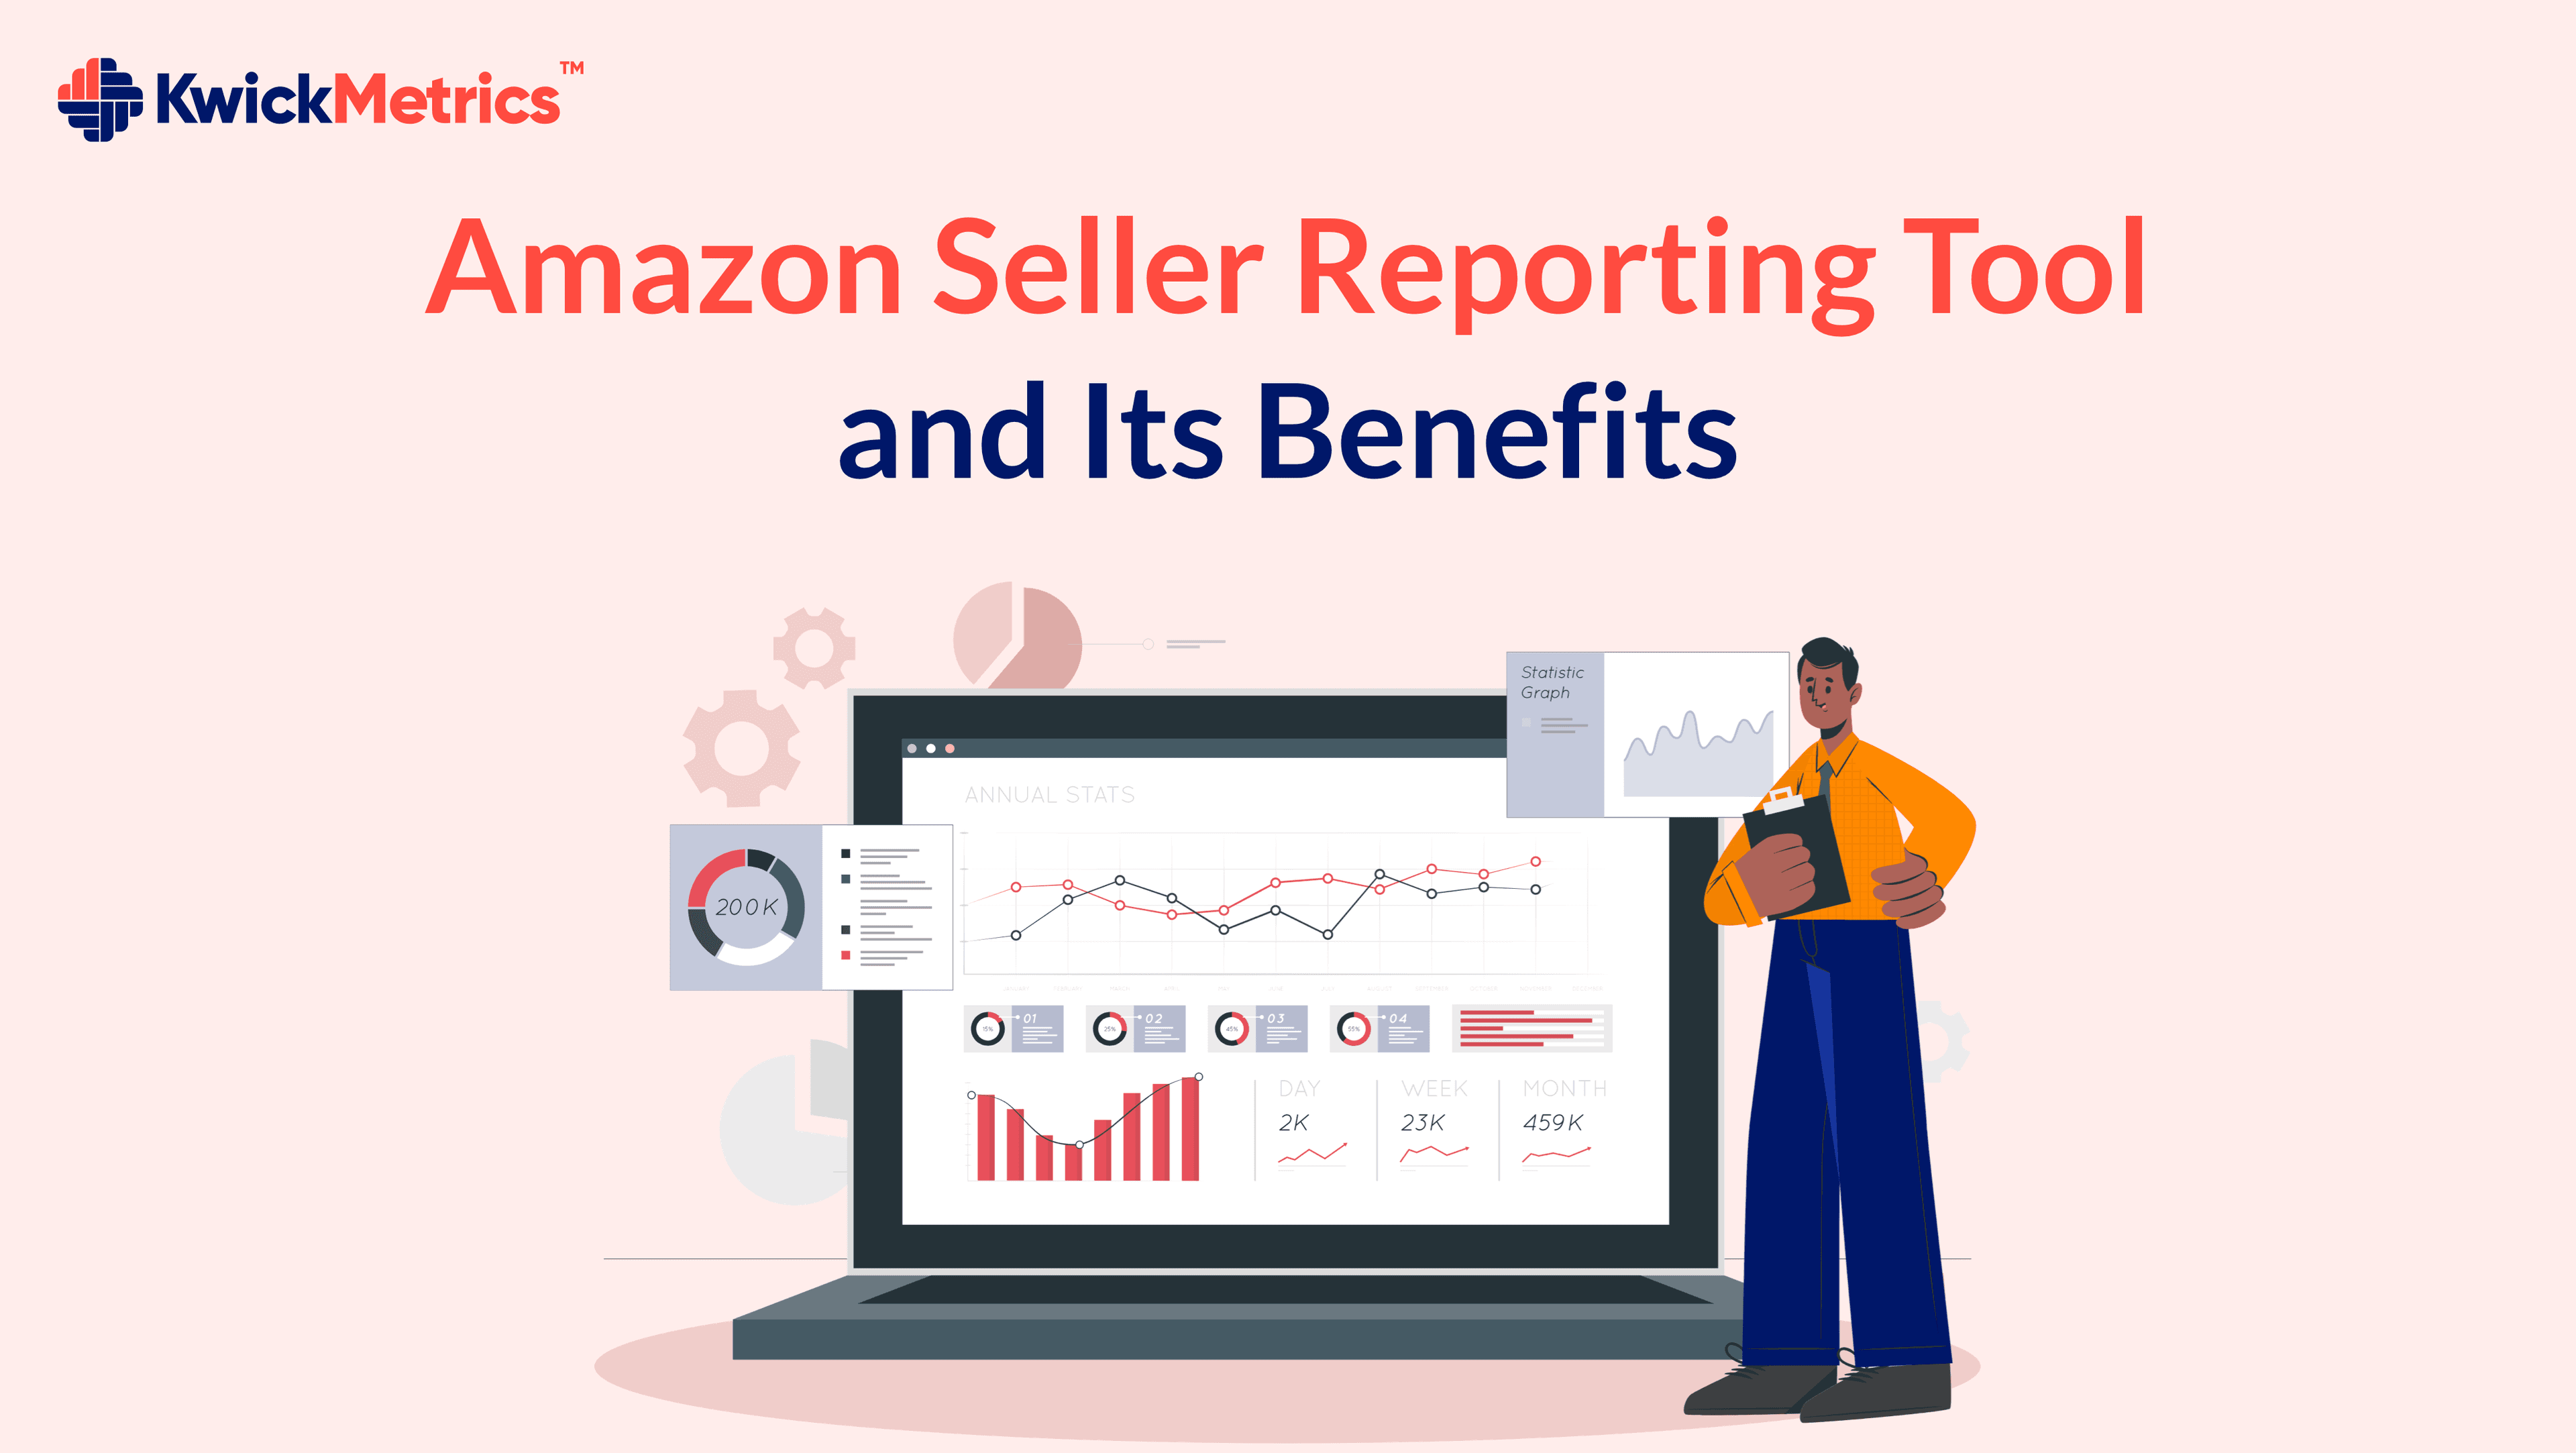 What Is the Amazon Seller Reporting Tool and Its Benefits?